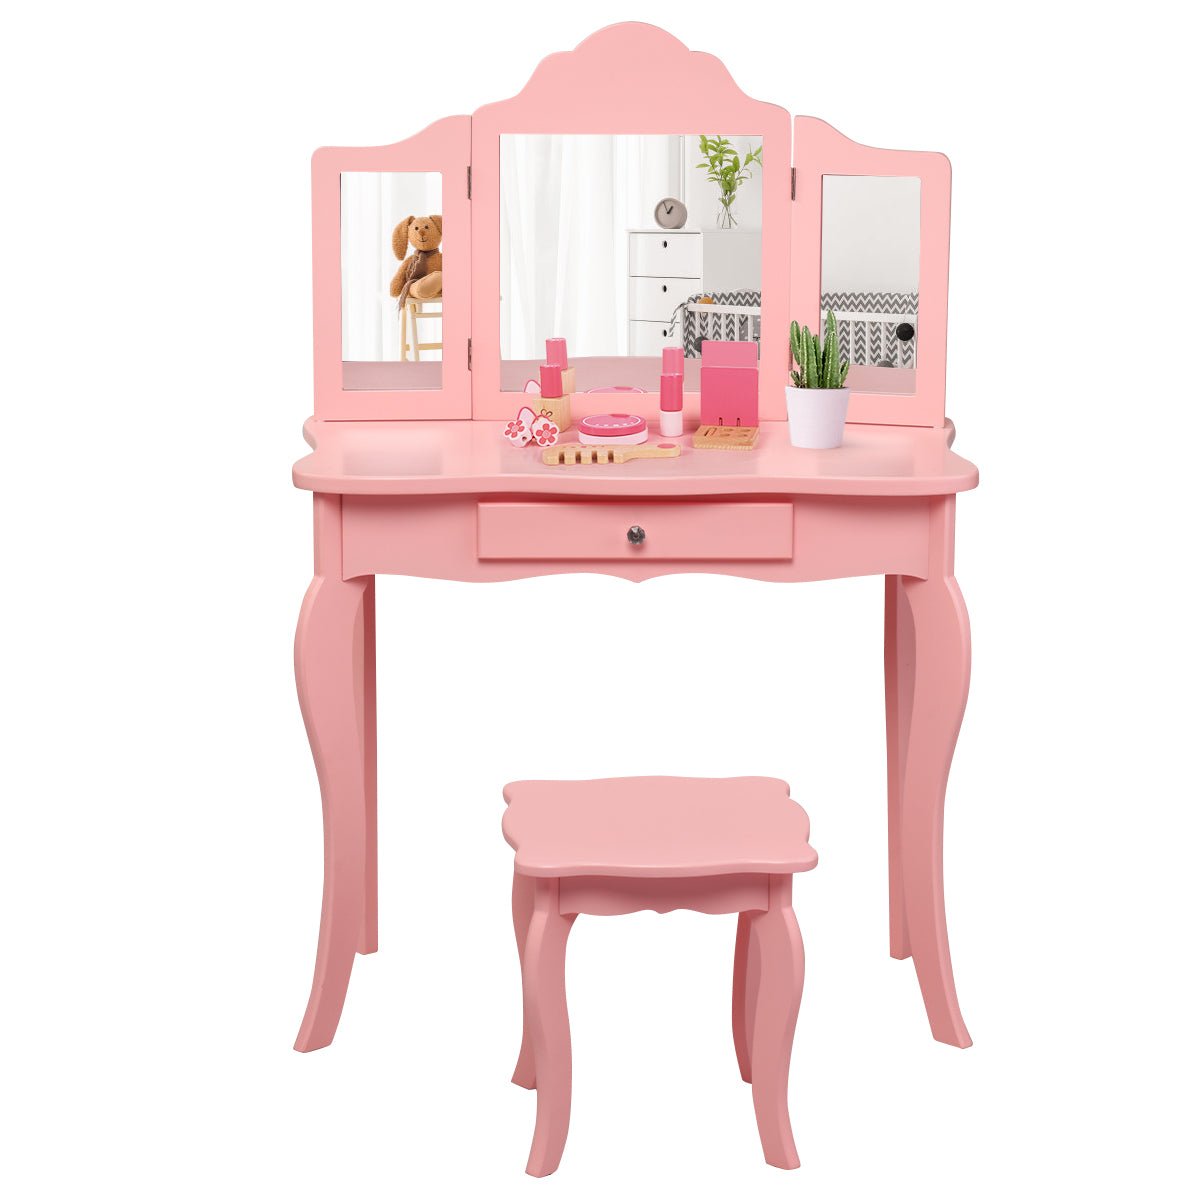 Kids Dressing Table Set with Stool & Mirror - Encourage Creativity